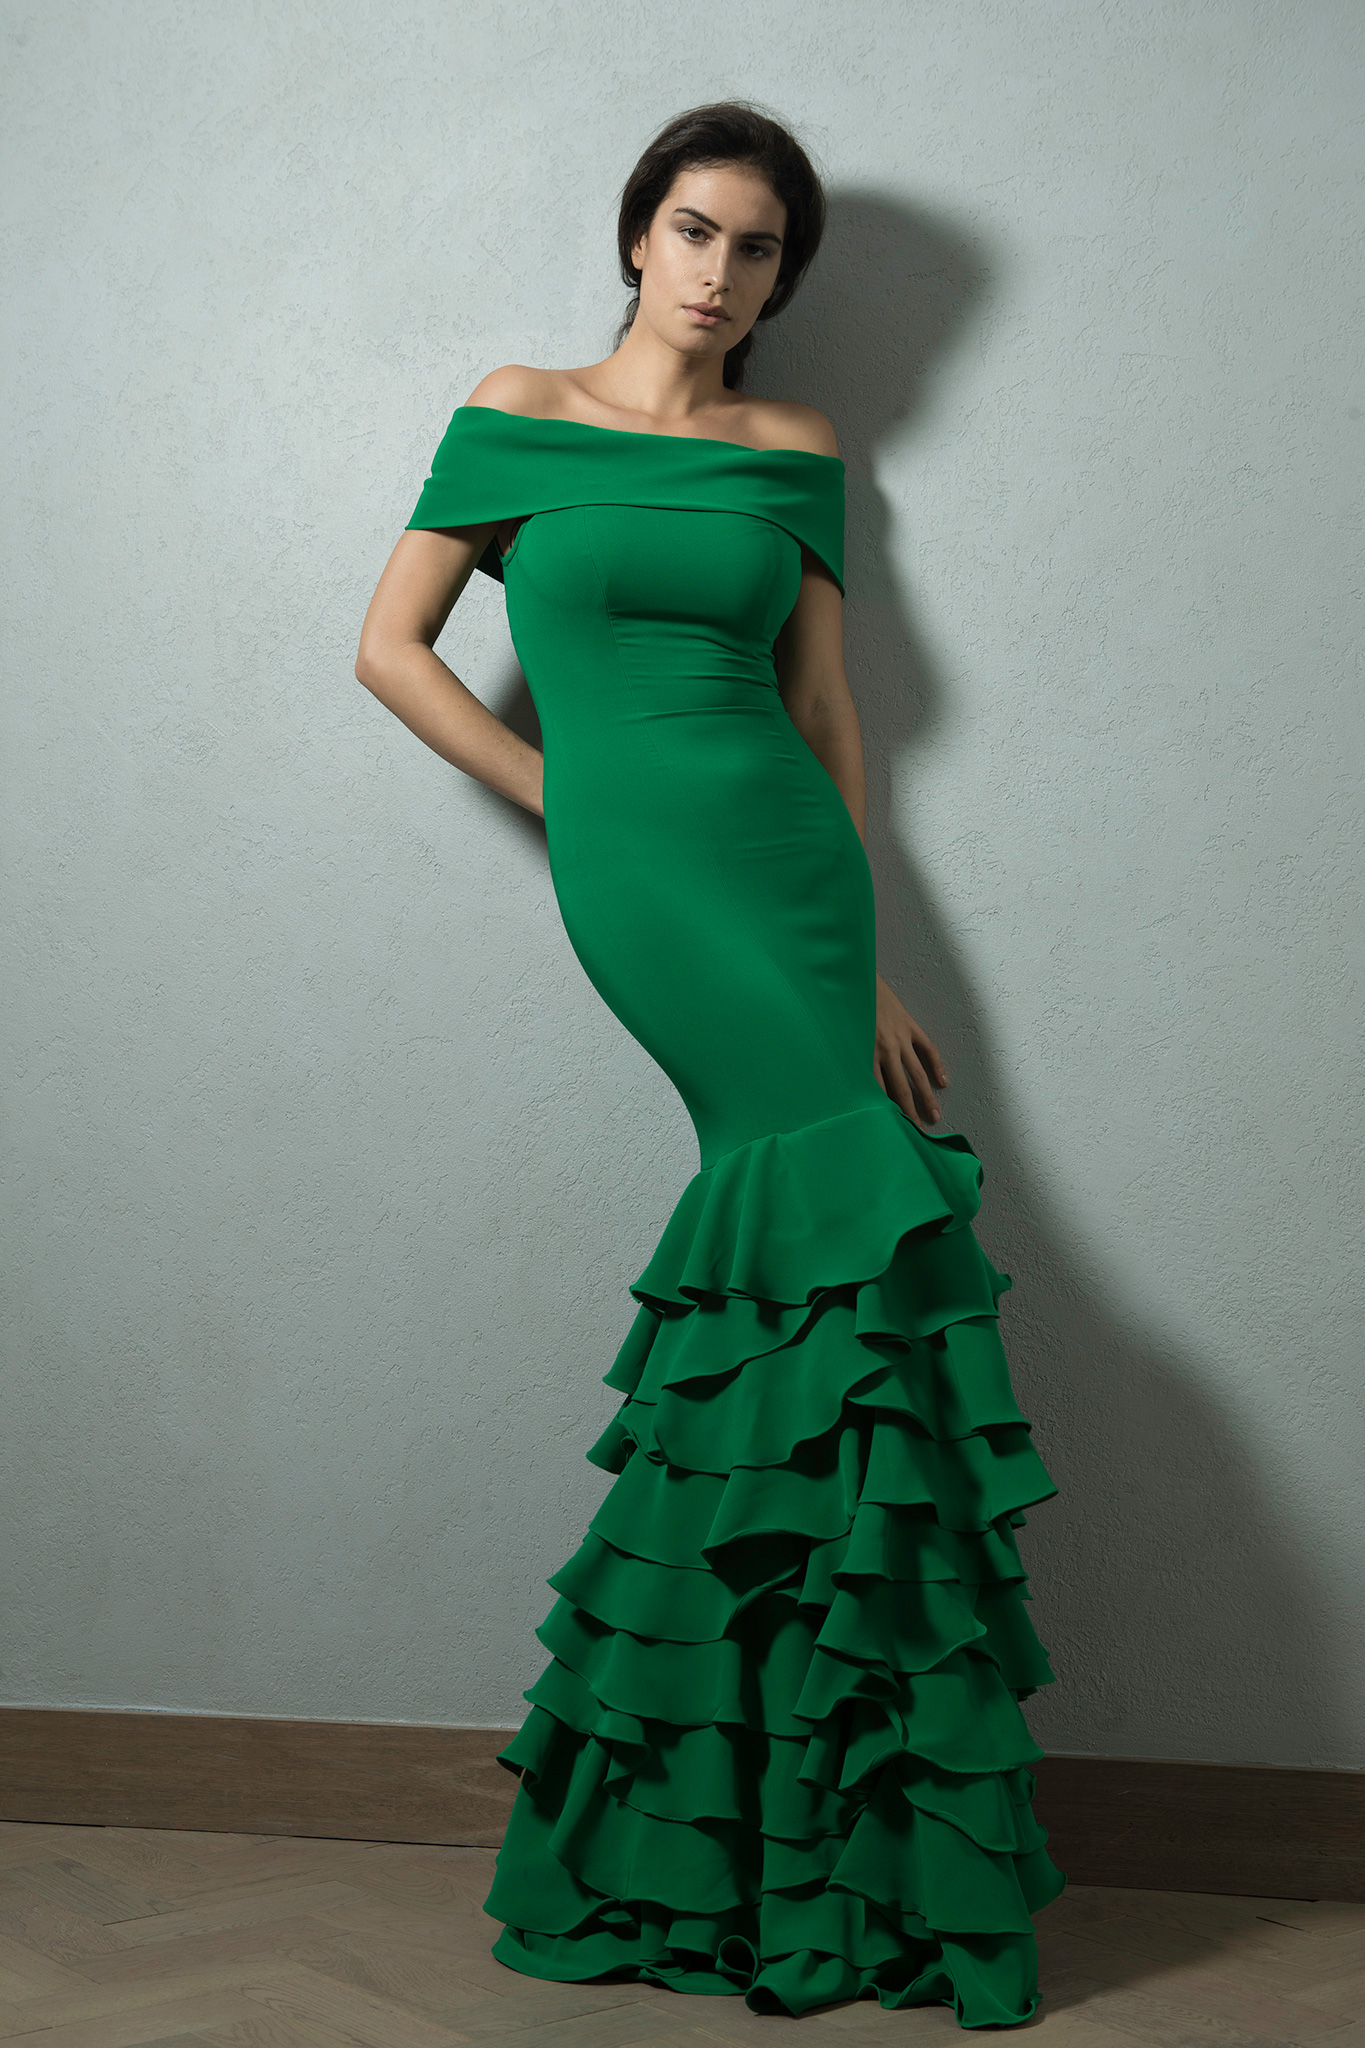 AAVVA Dress Series - The First Ever Resort Collection From AAVVA